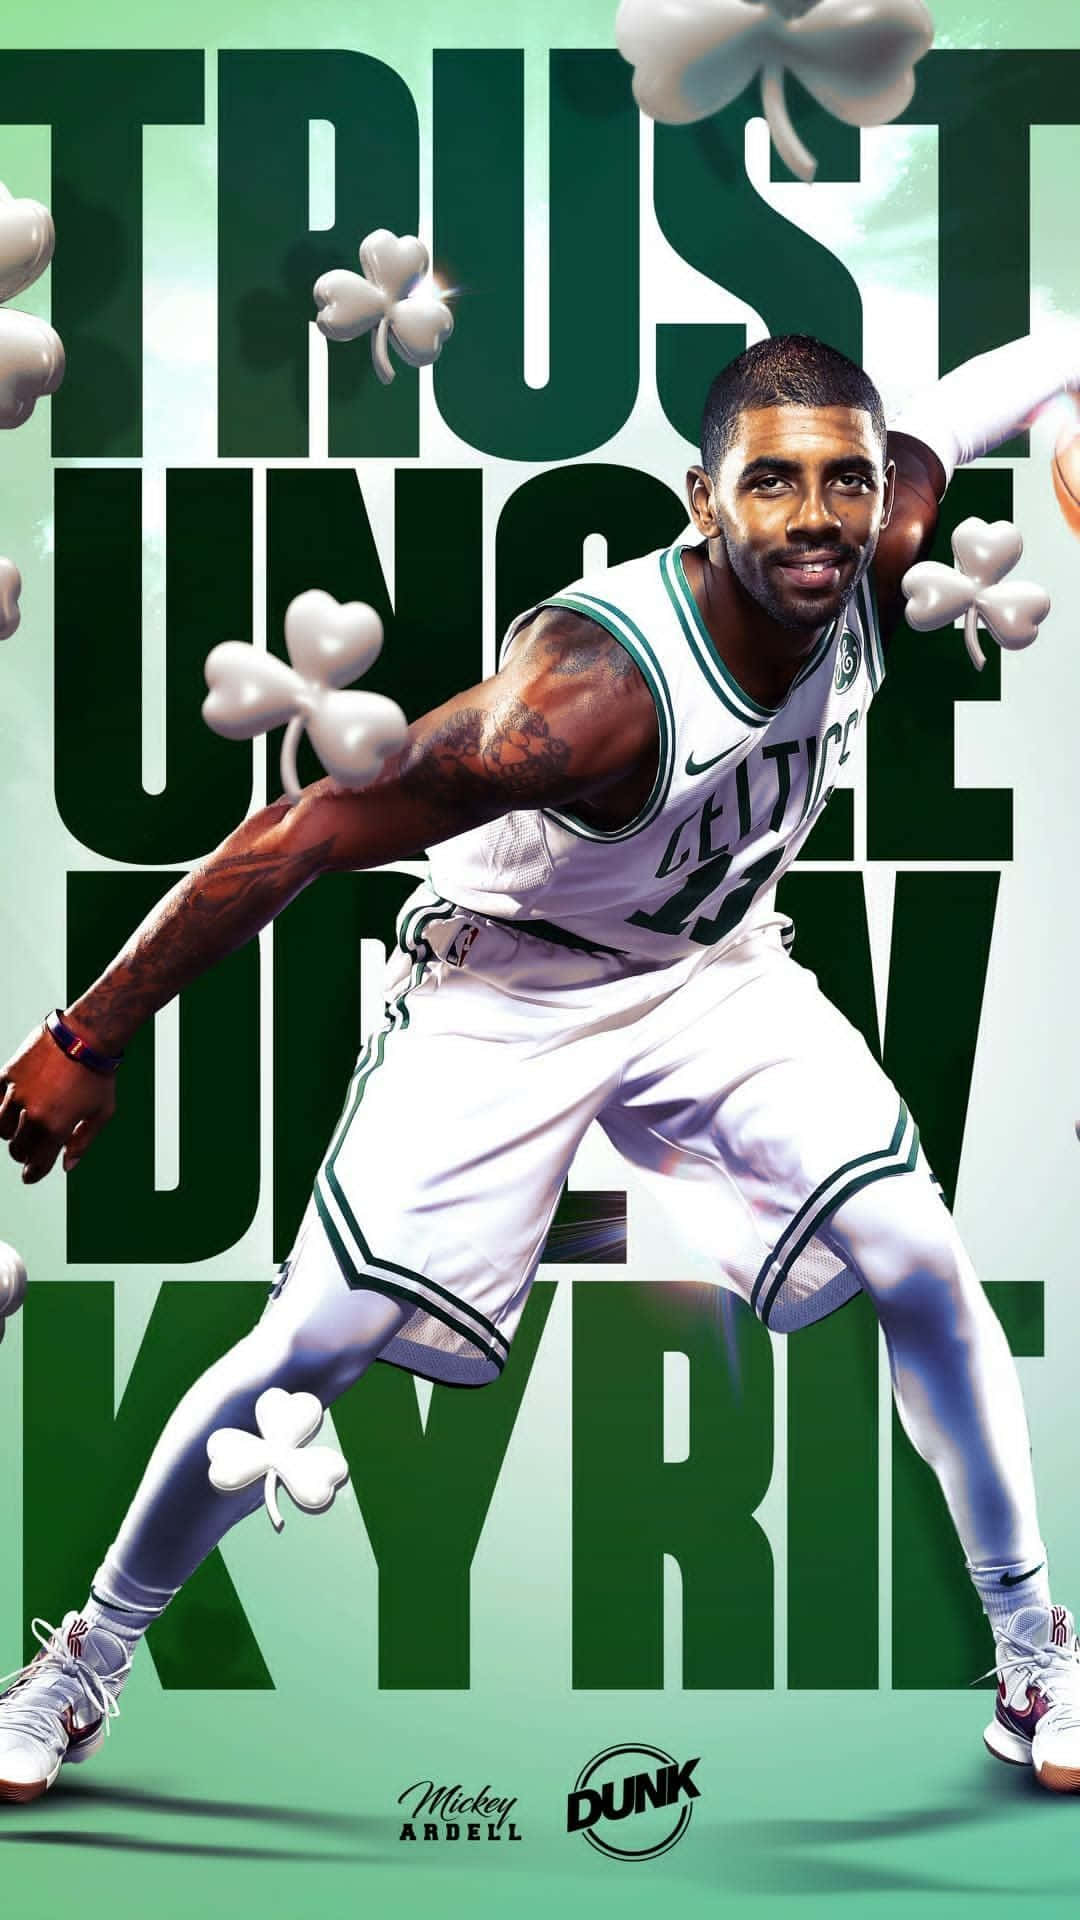 Free Kyrie Iphone Wallpaper Downloads, [100+] Kyrie Iphone Wallpapers for  FREE 